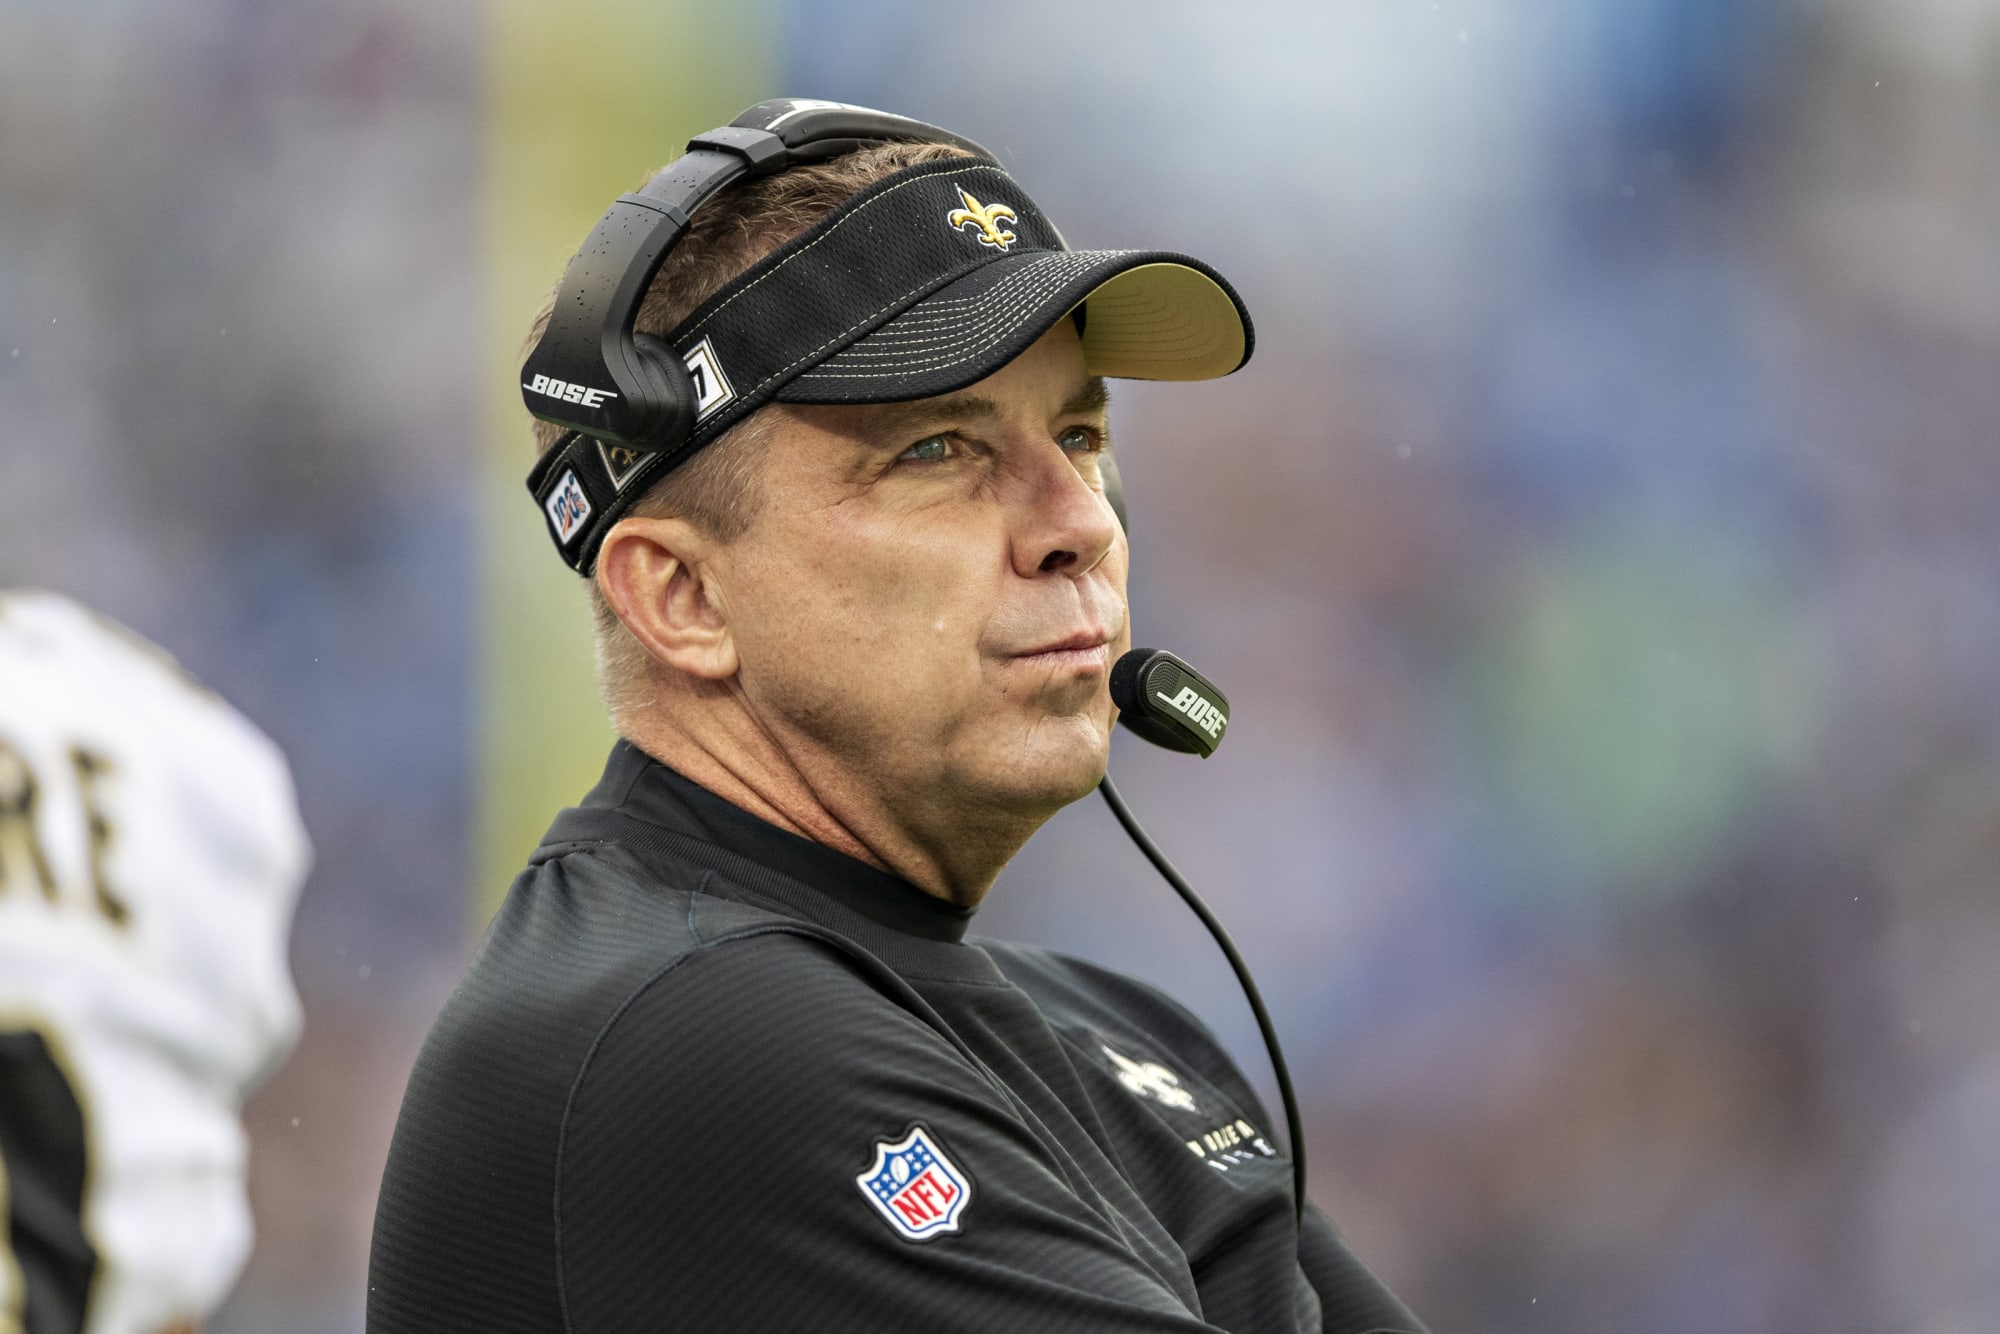 Sean Payton sweepstakes about to end in most boring way possible